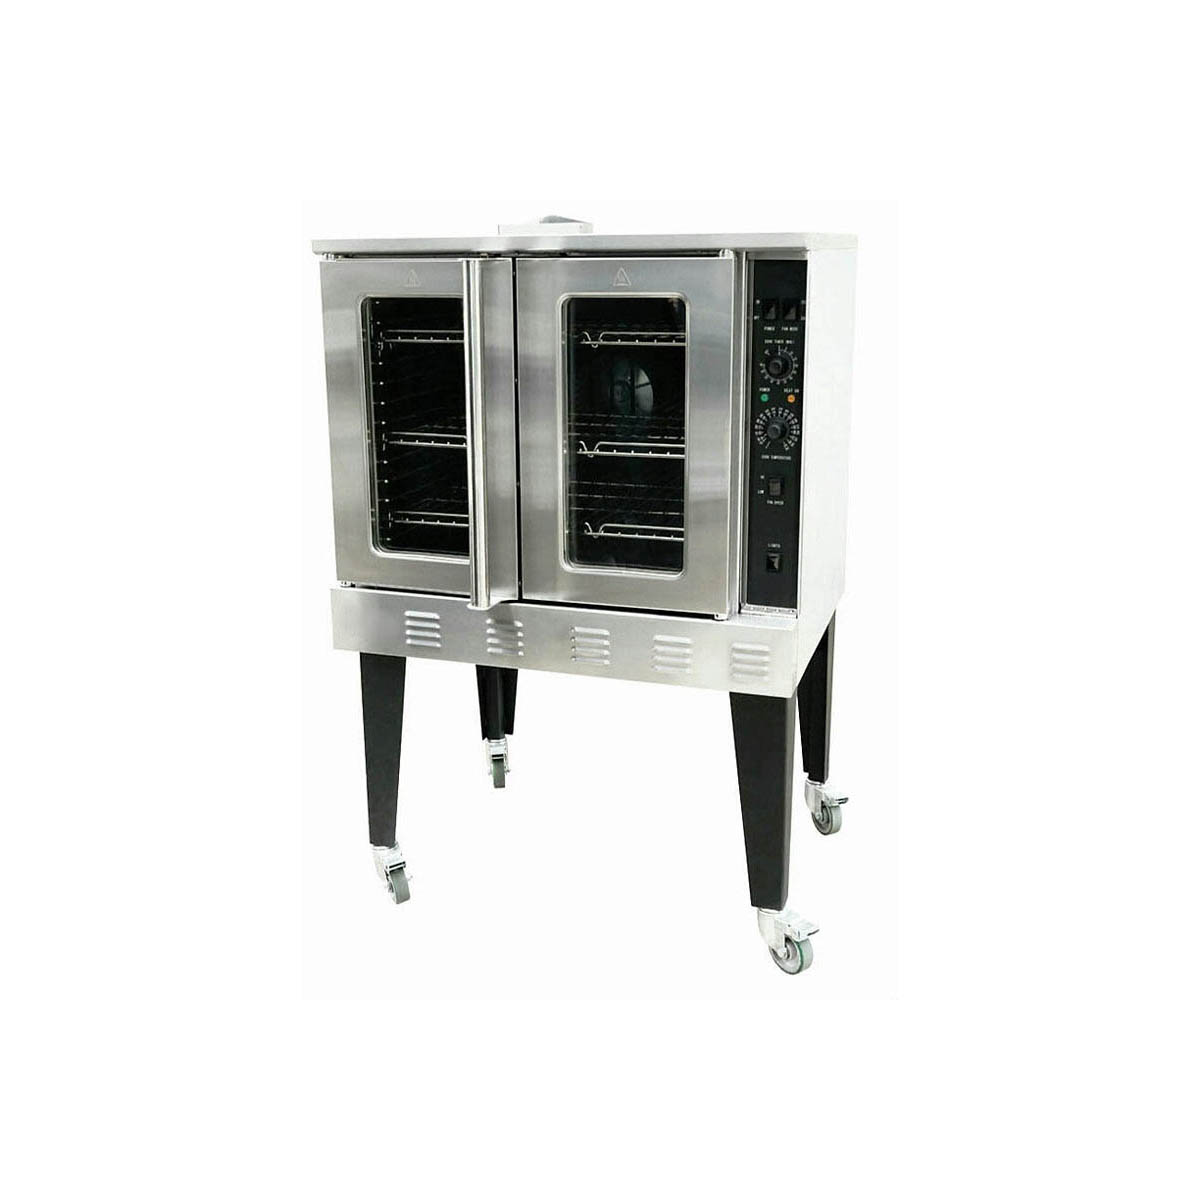 Serv-Ware SGCO-1 Single Deck Full Size Gas Convection Oven with Solid State Controls